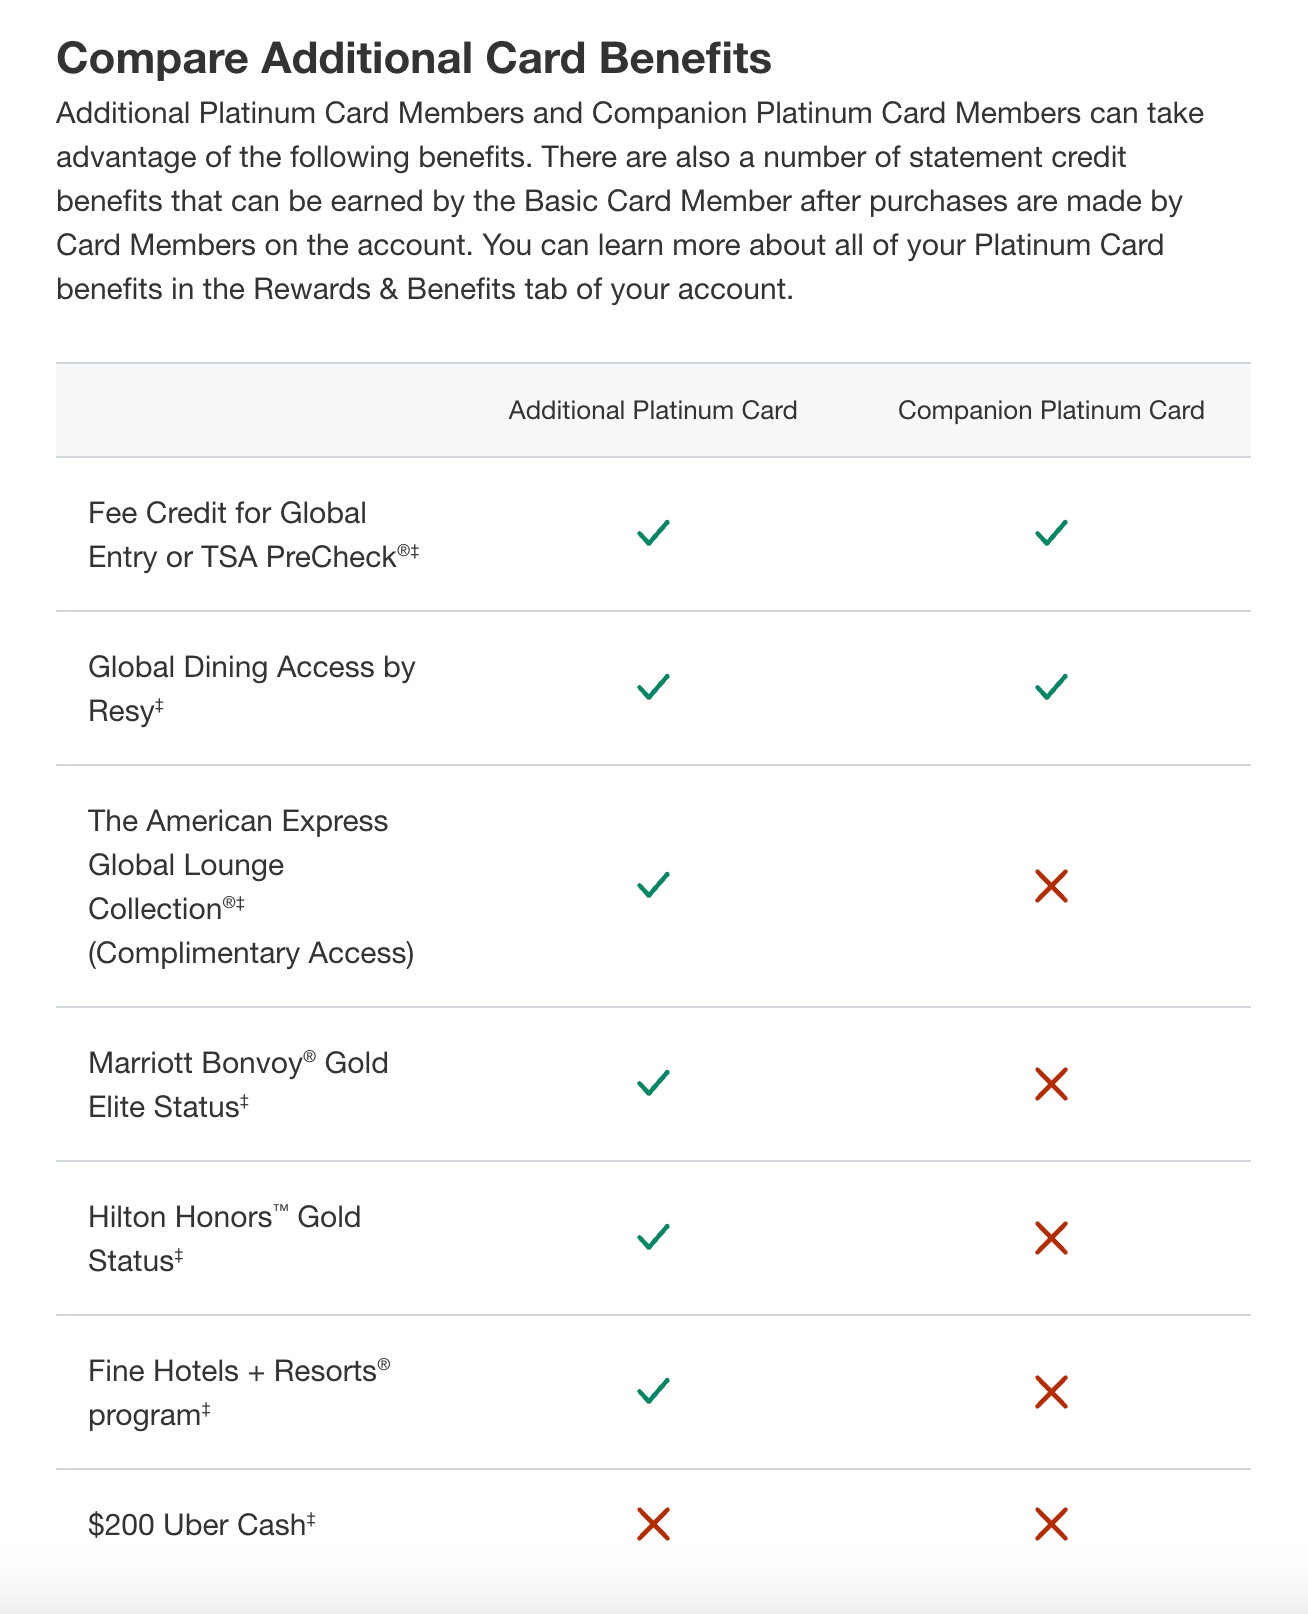 Comparing the benefits between additional Amex Platinum and companion cardholders